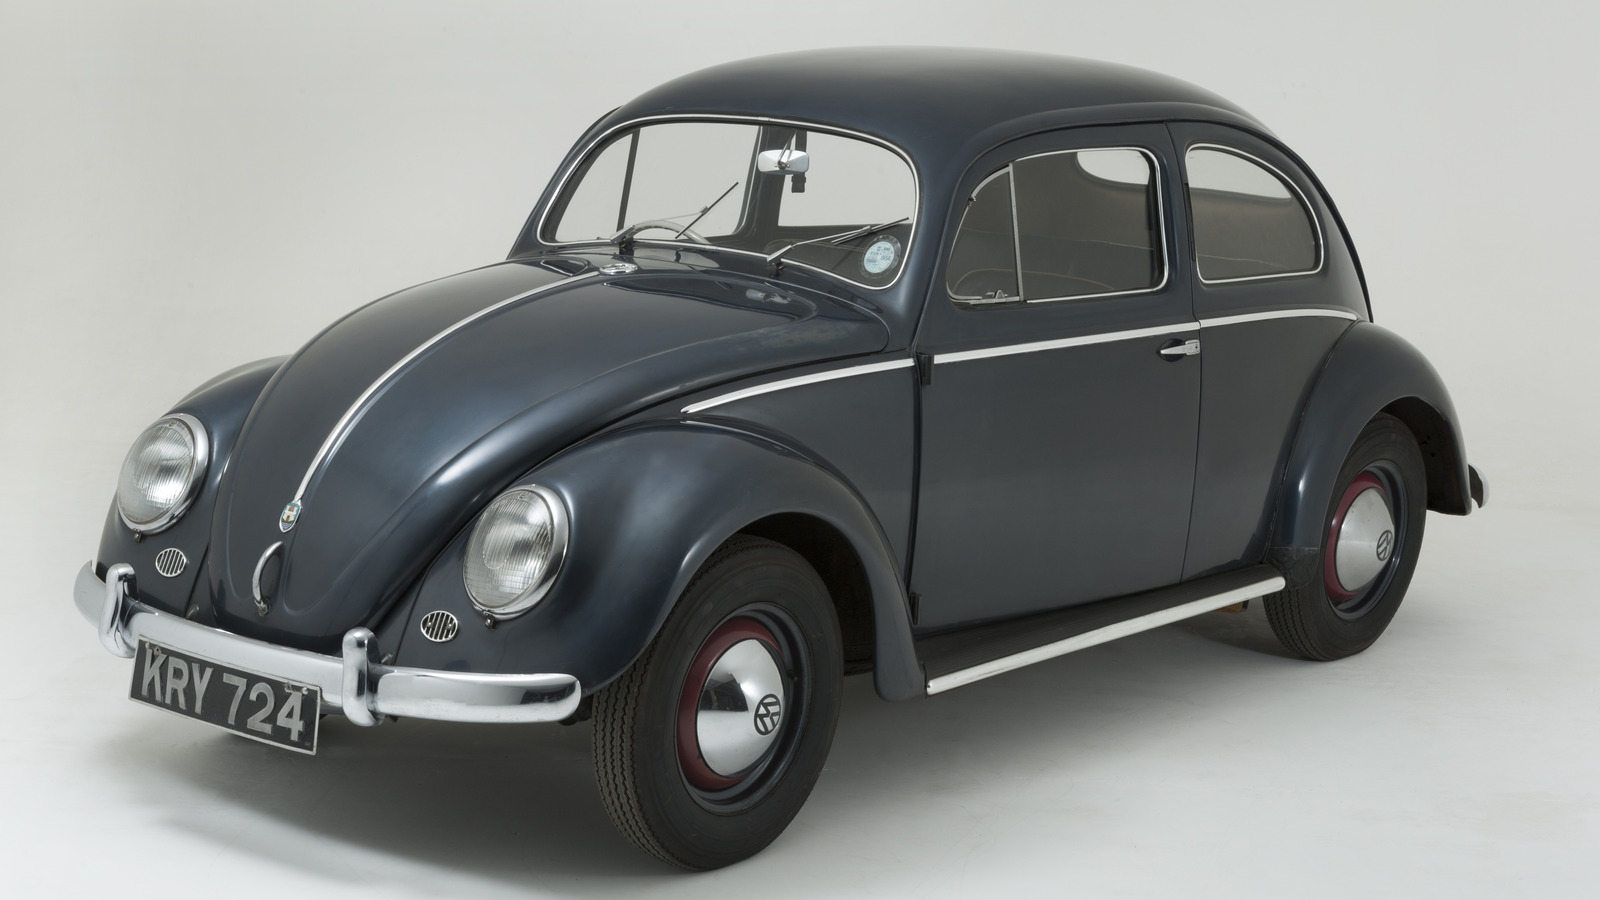 https://www.slashgear.com/img/gallery/the-reason-why-the-vw-beetle-was-banned-in-the-us/l-intro-1658168625.jpg